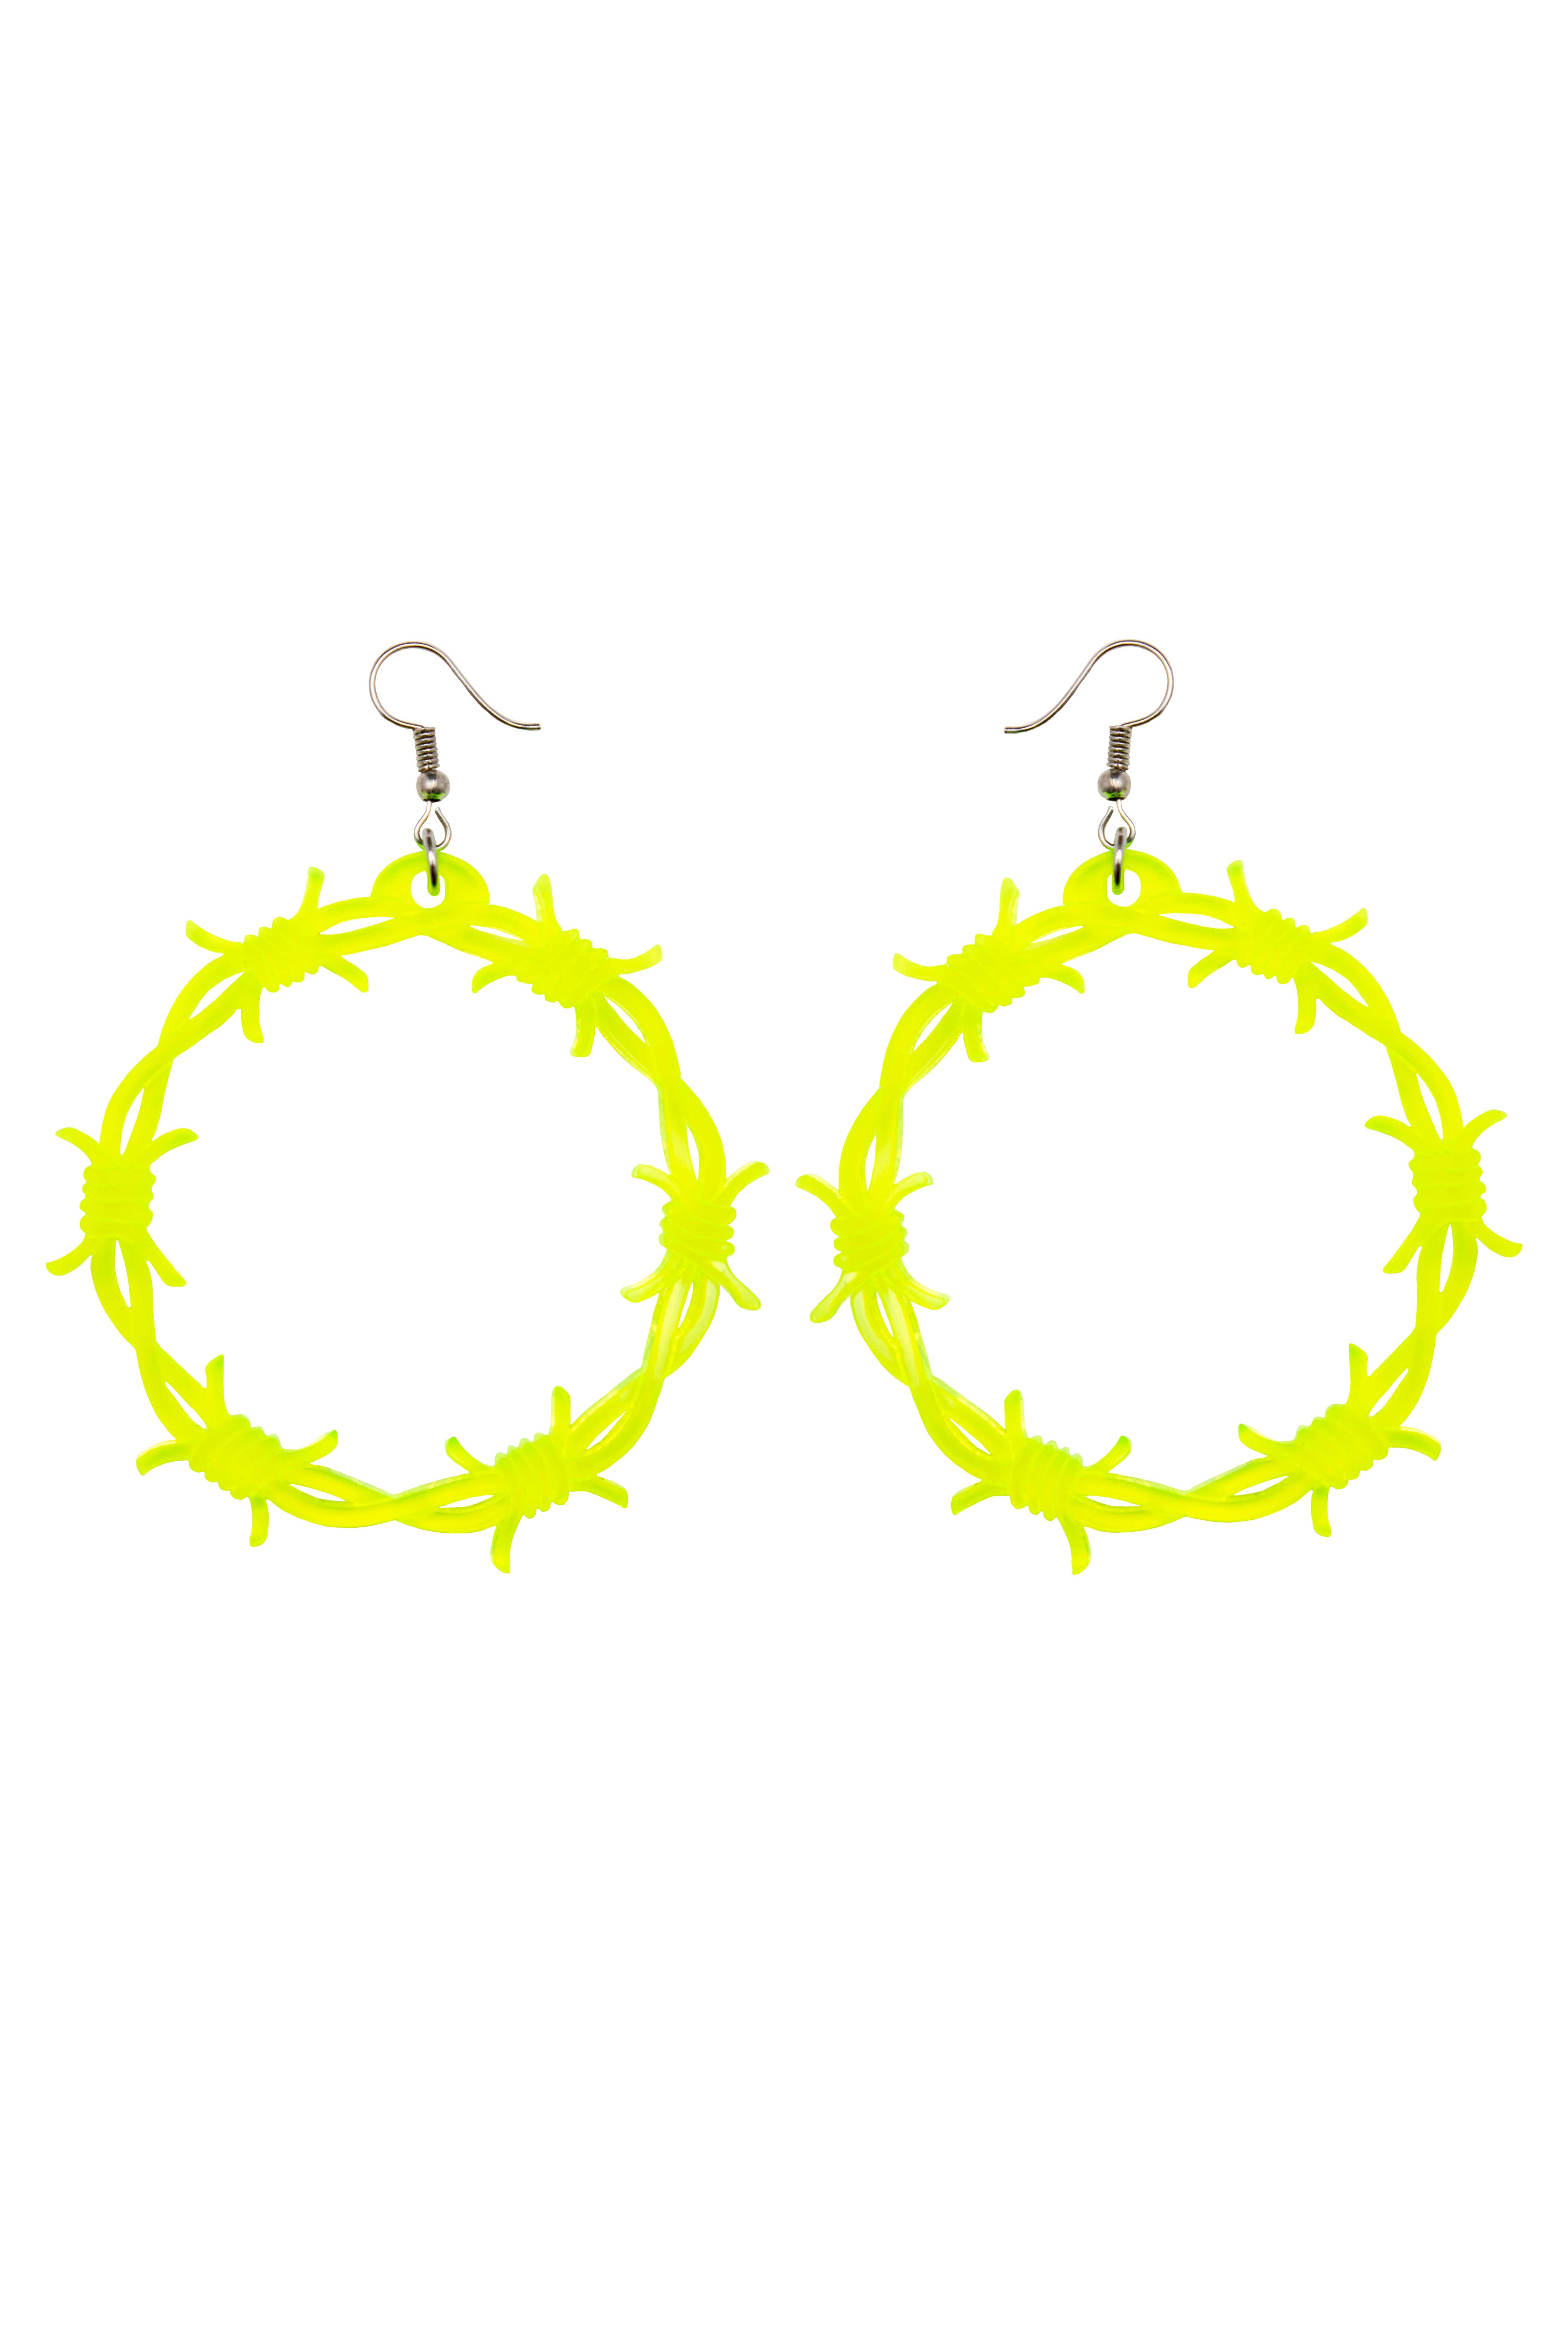 Neon Yellow Hoop Earrings Polymer Clay Large Hoop Earring Neon Statement Hoop  Earrings for Bold 90s Party Outfit, Movie Earrings - Etsy